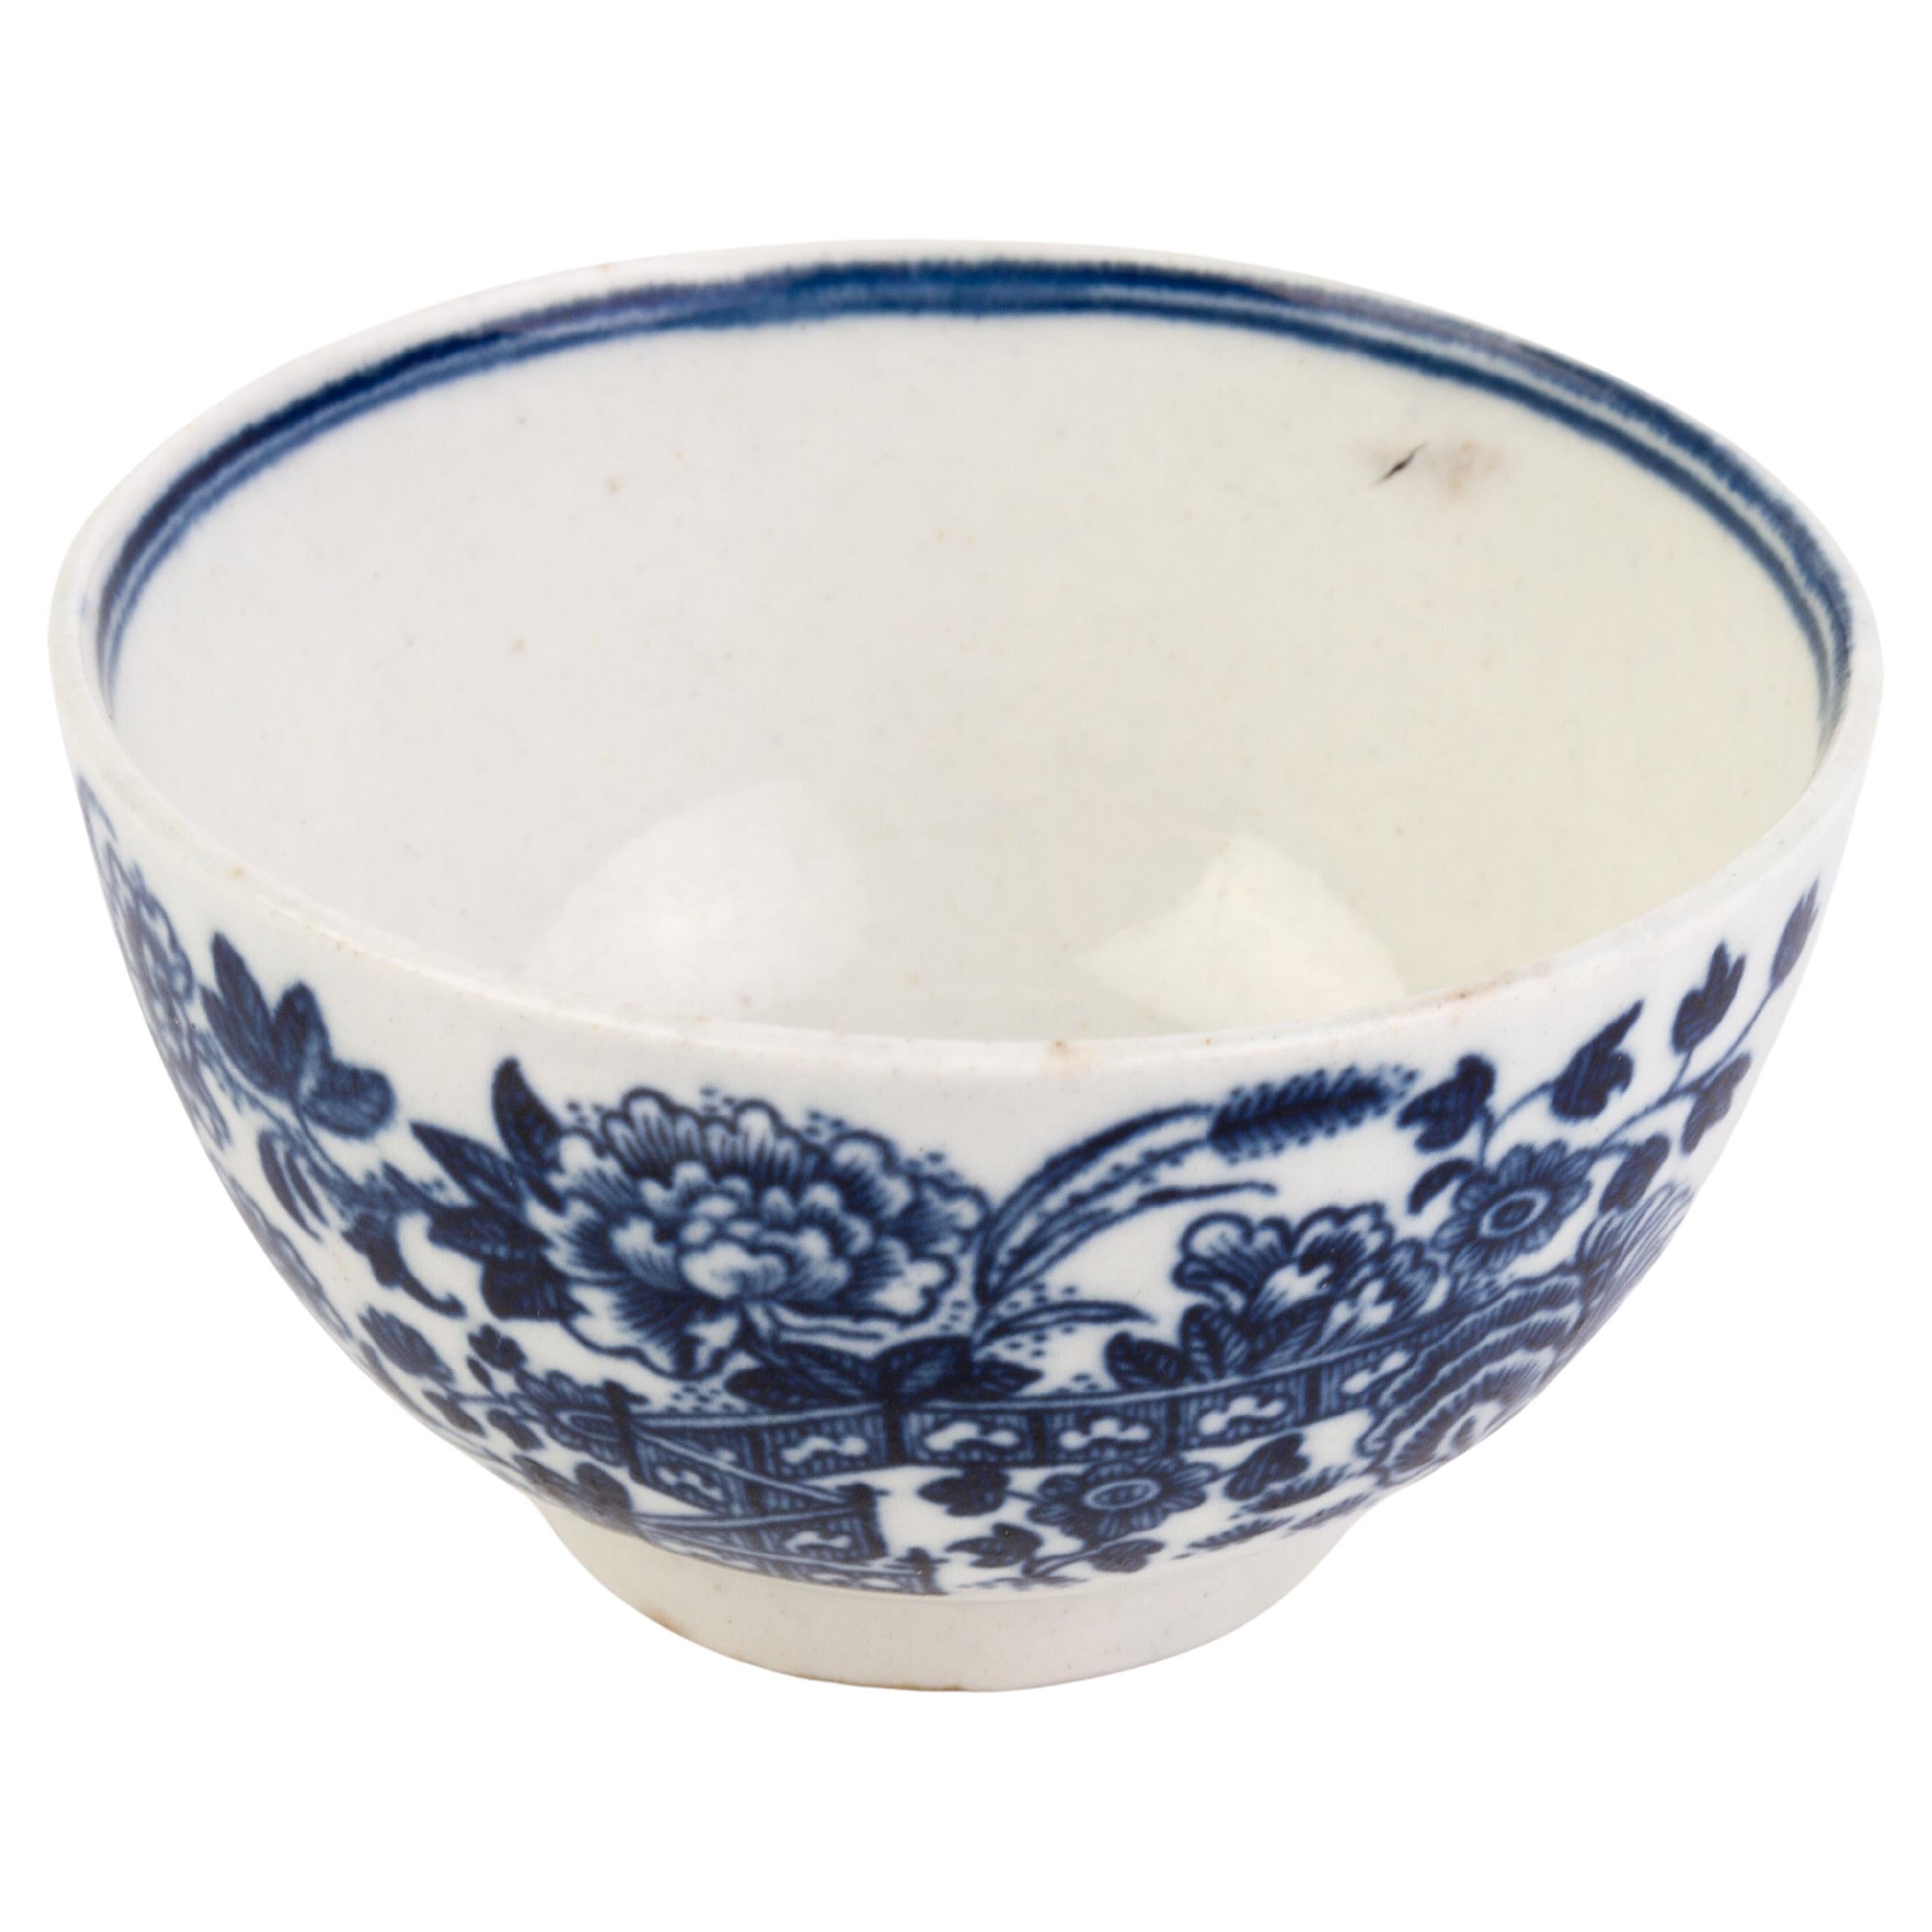 Late 18th Century George III Chinese Garden Worcester Porcelain Tea Bowl